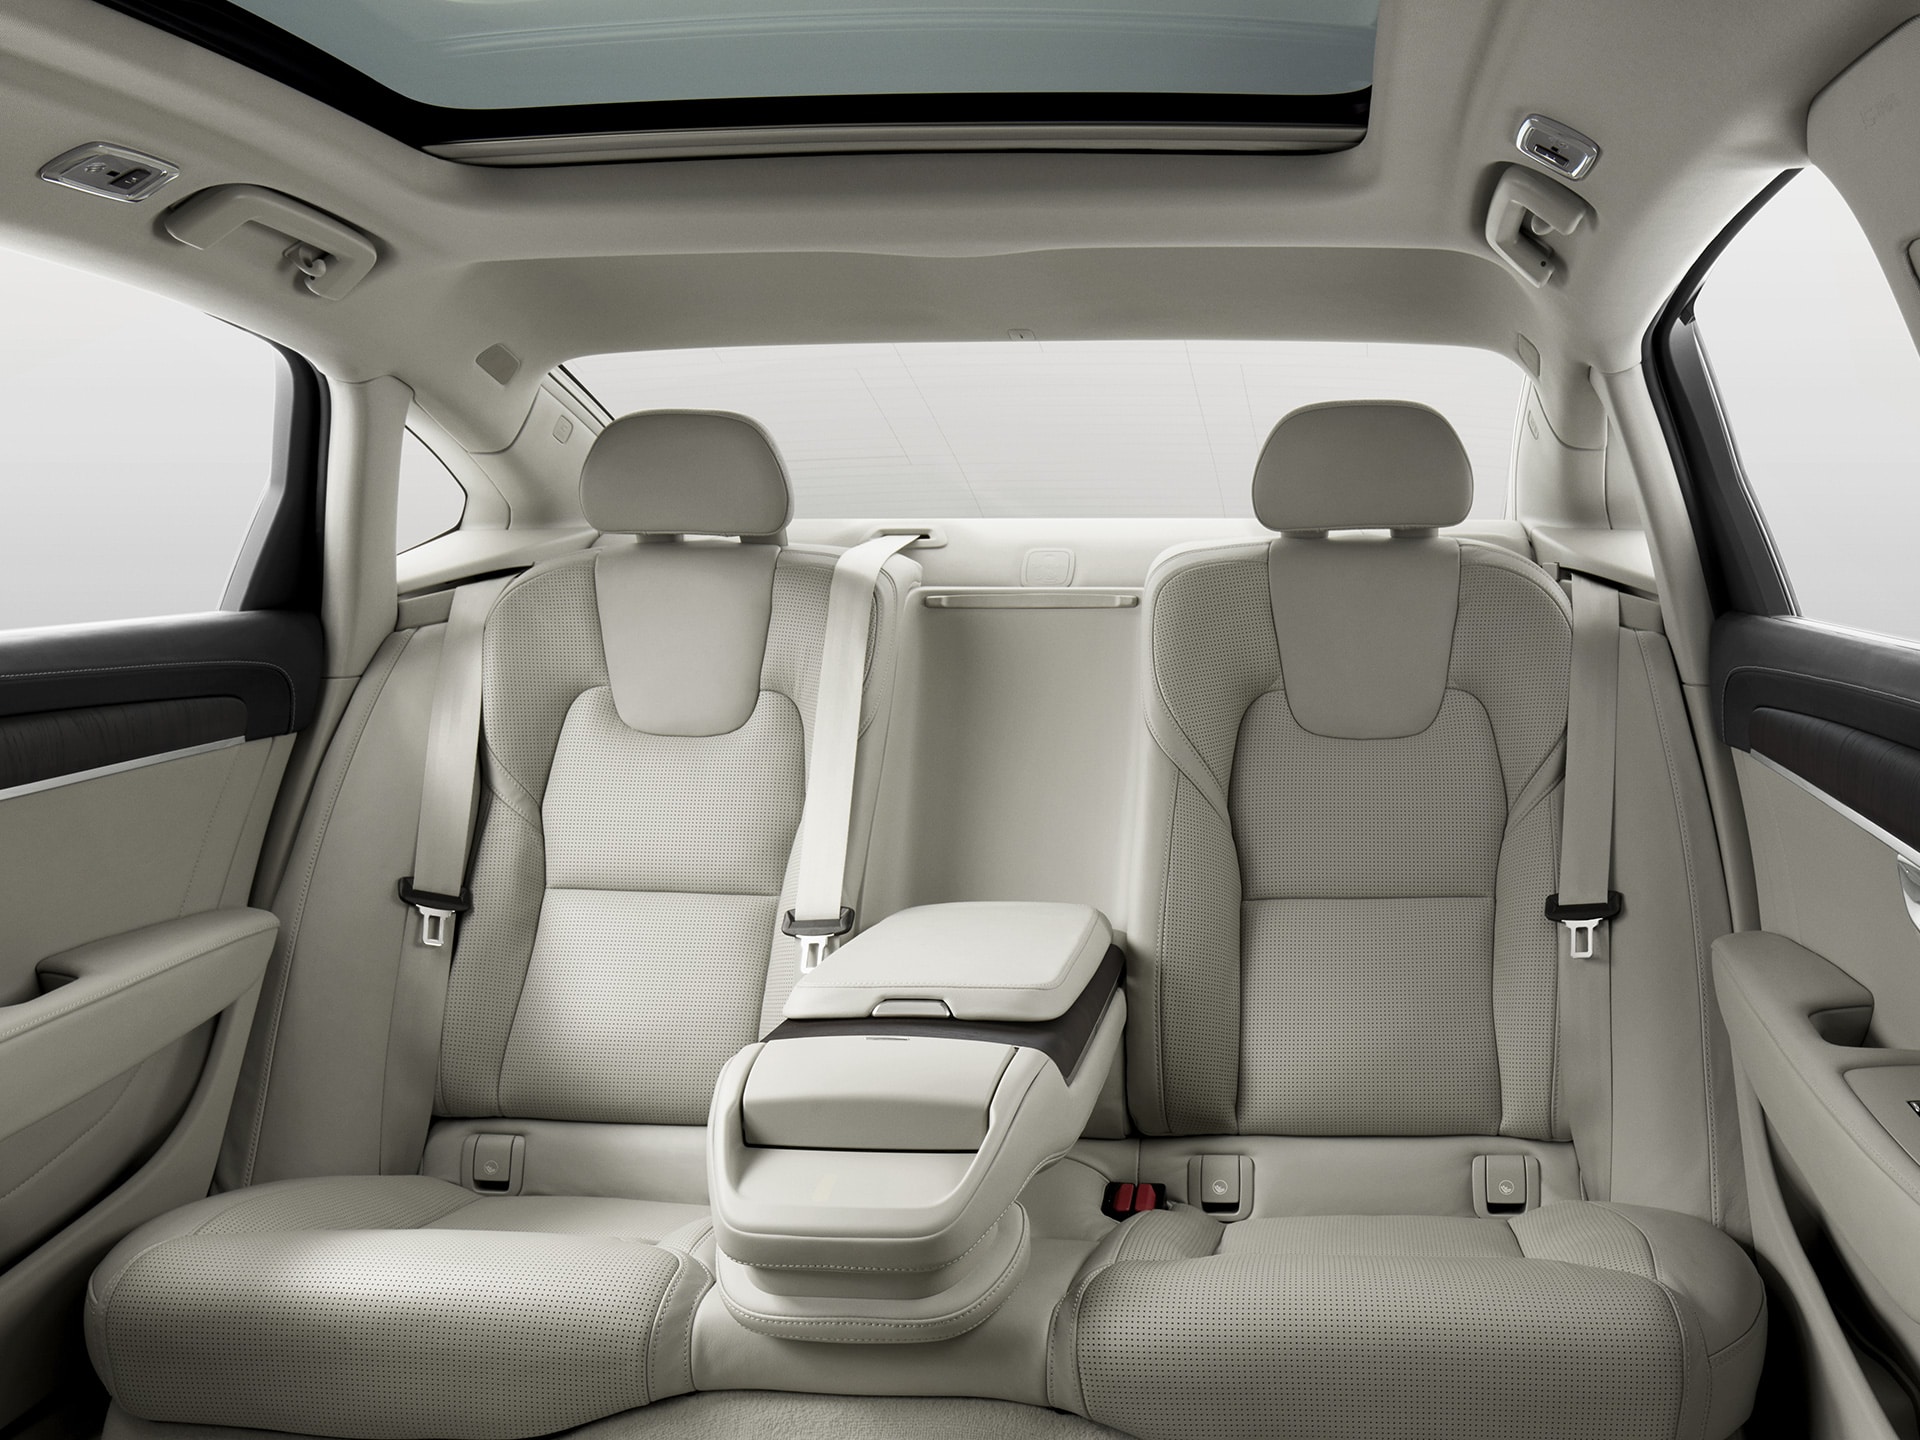 Rear seats with generous legroom and the exclusive center armrest in the S90 sedan.